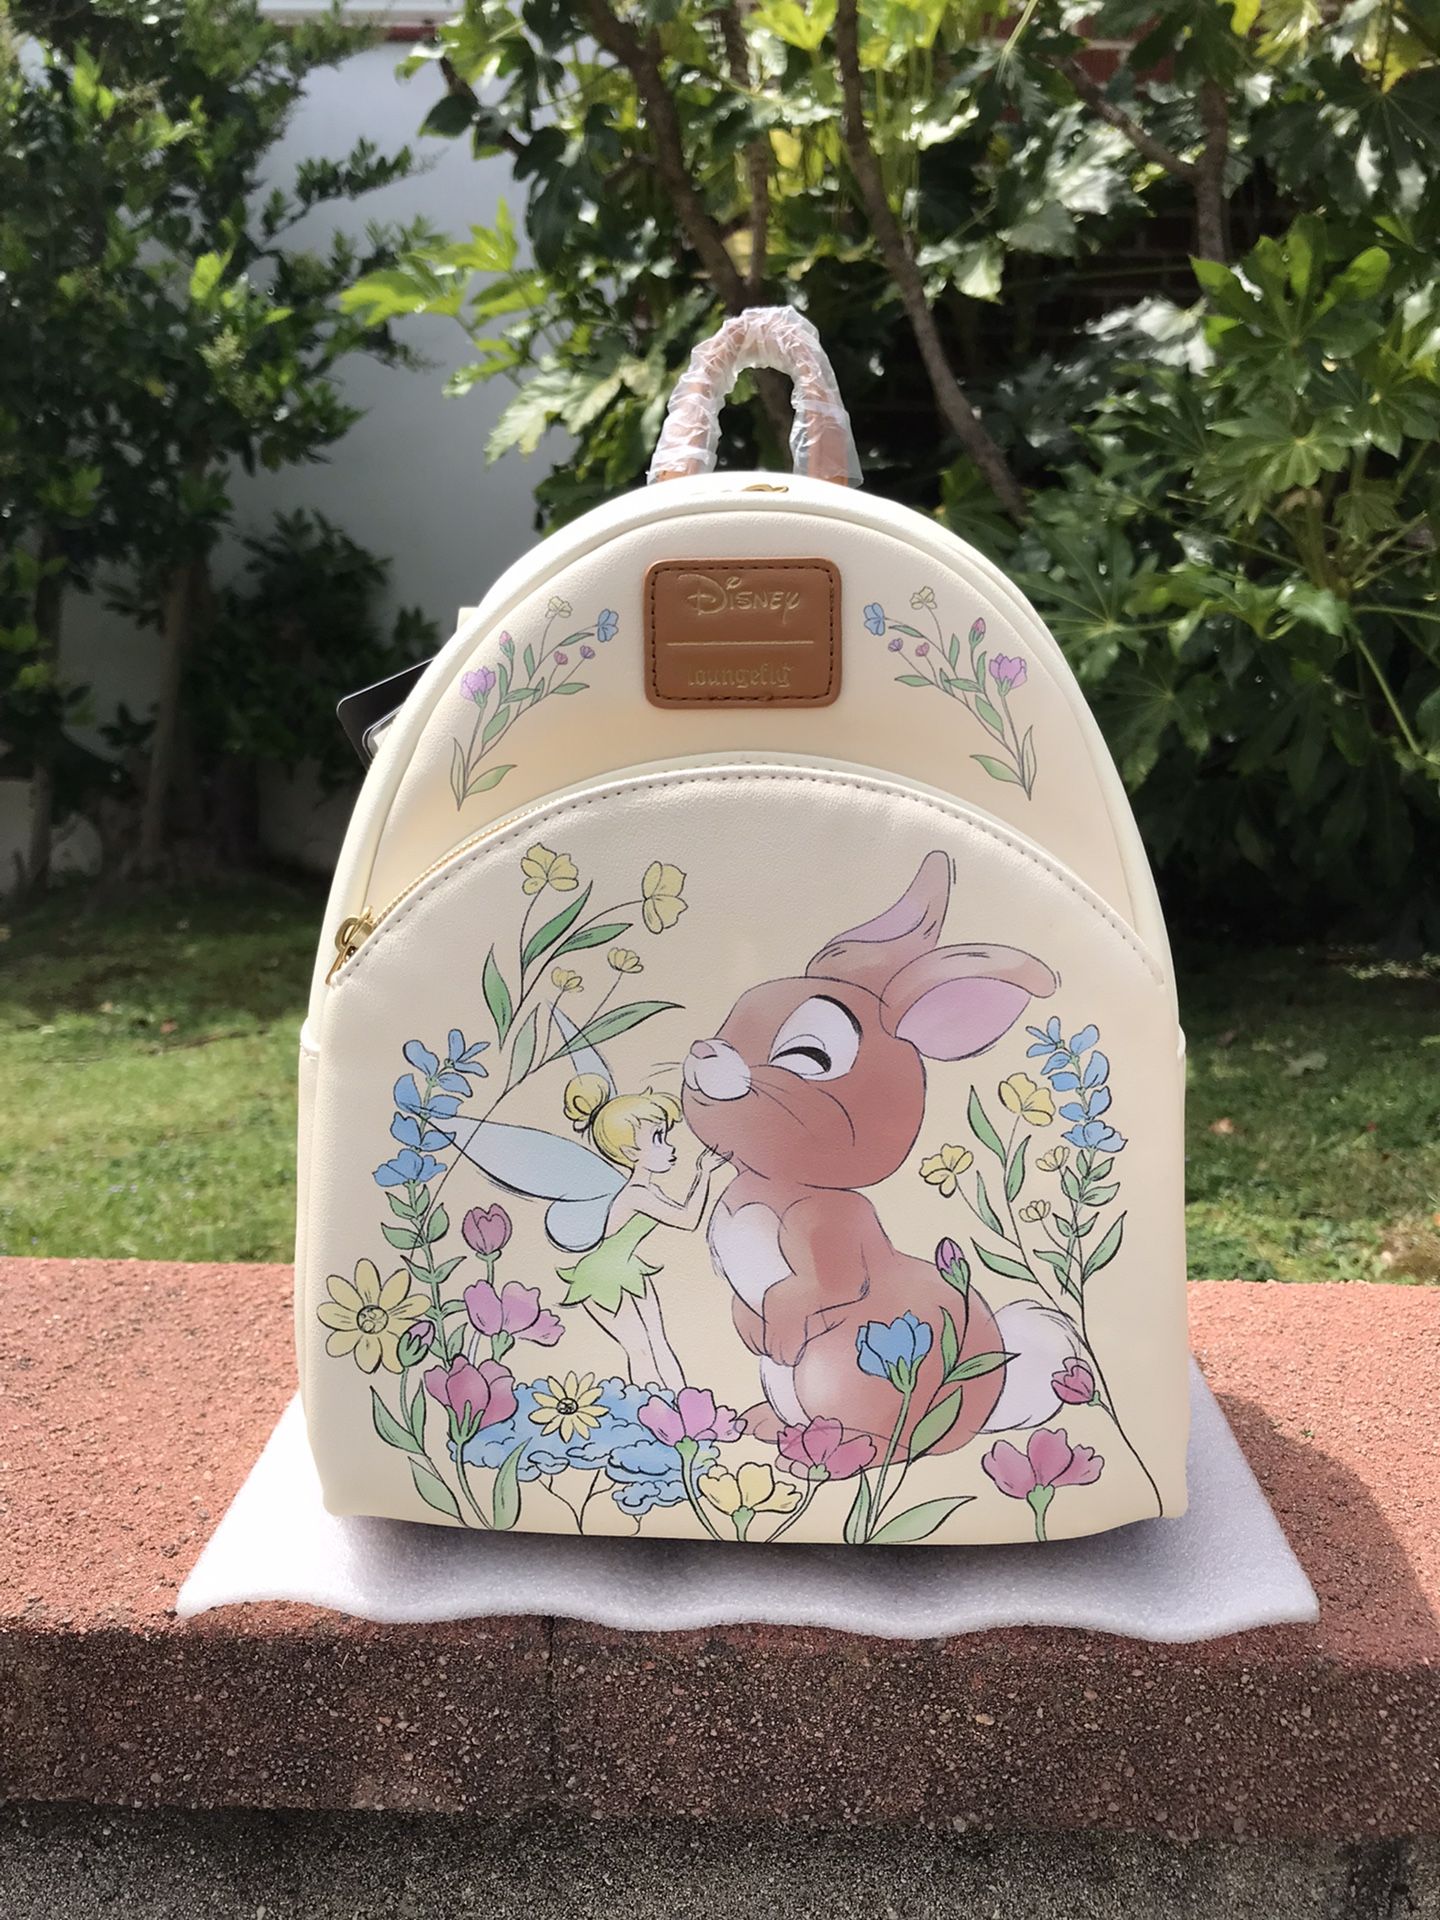 DISNEY LOUNGEFLY TINKER BELL & BUNNY MINI BACKPACK 